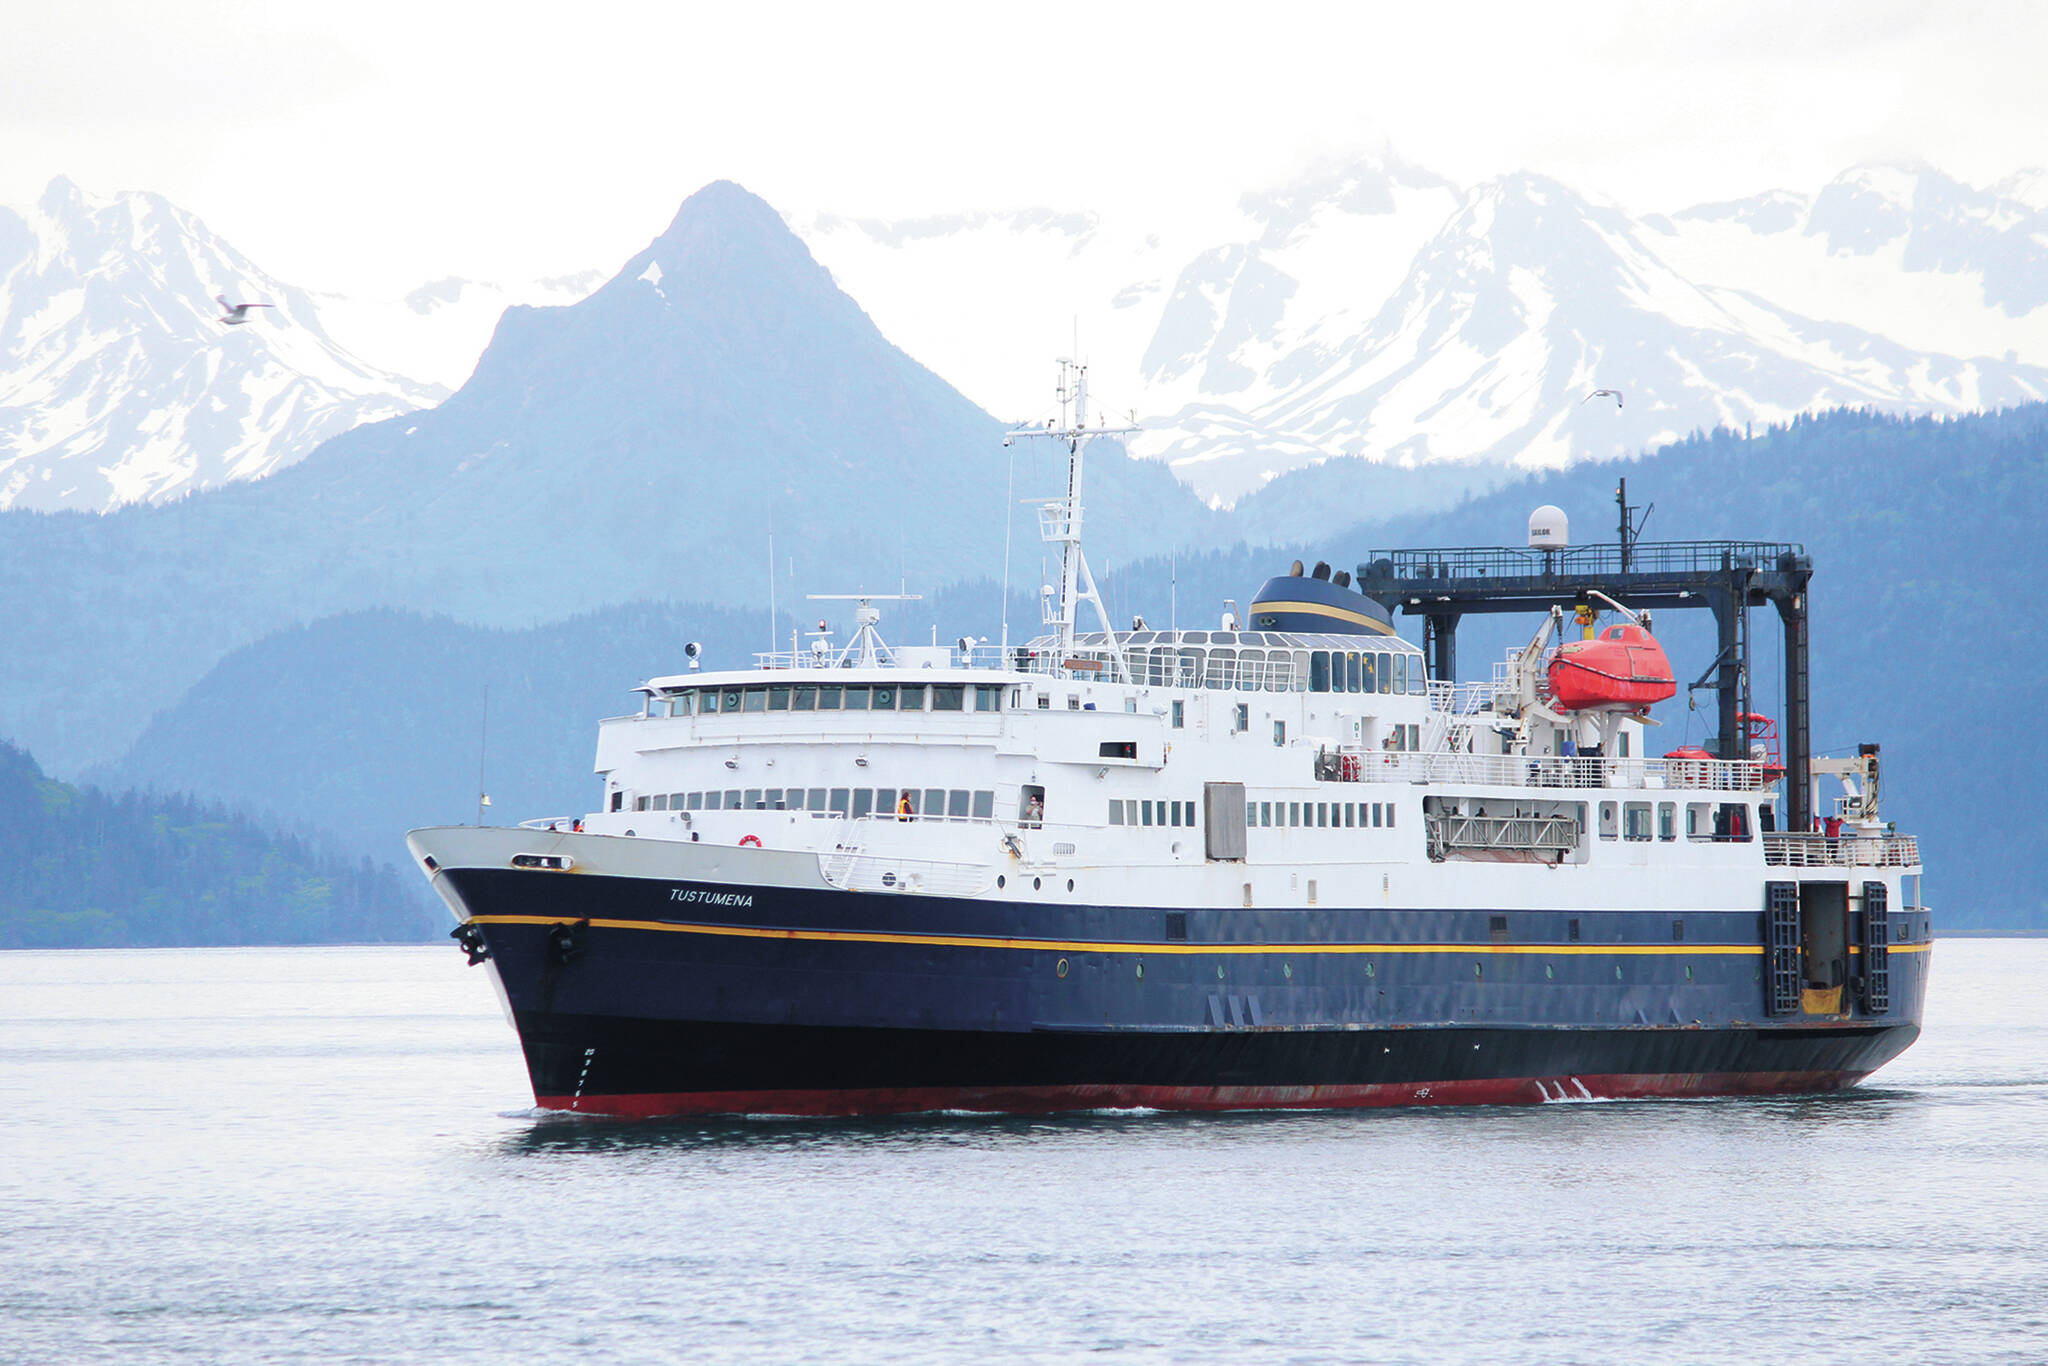 The state ferry M/V Tustumena pulls into the Homer Harbor on Monday, June 8, 2020 in Homer, Alaska. (Photo by Megan Pacer/Homer News)